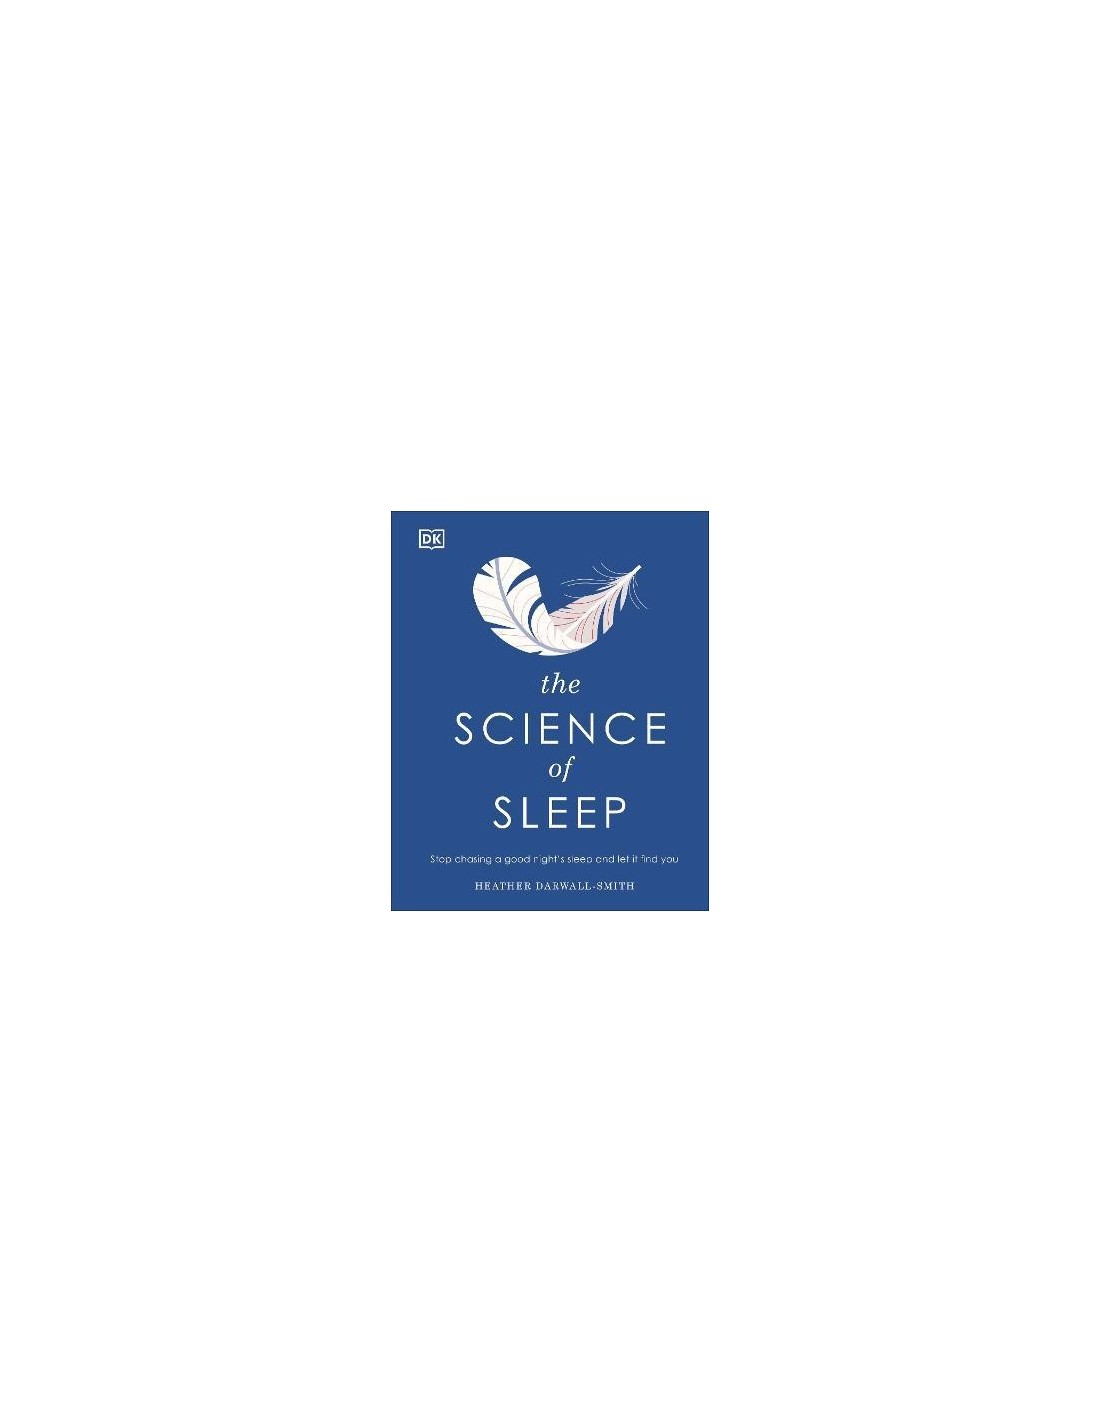 The Science of Sleep : Stop Chasing a Good Night's Sleep and Let It Find You